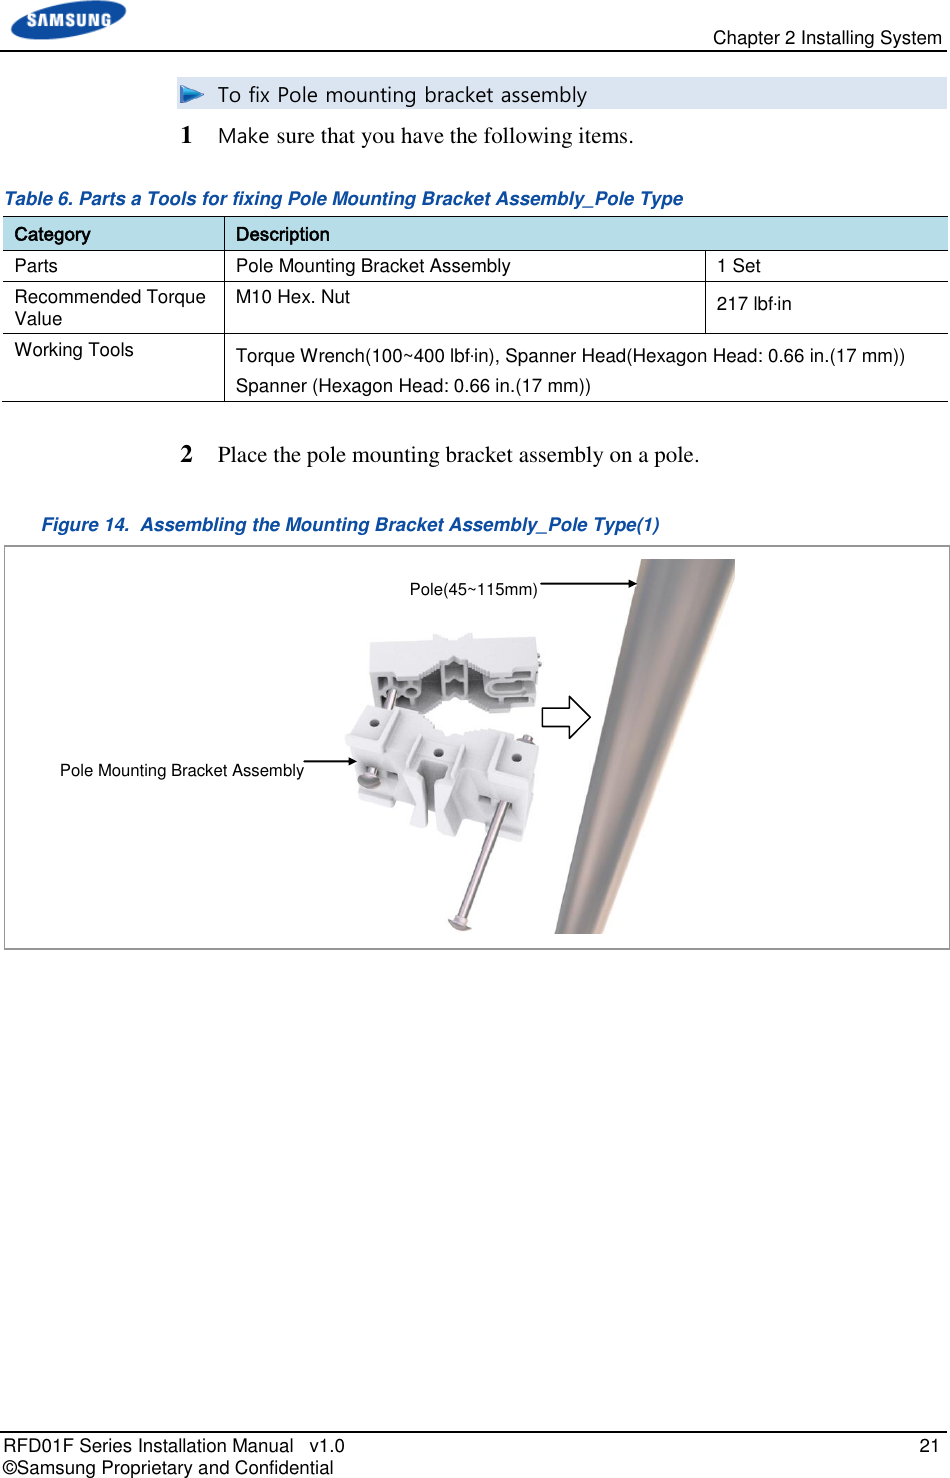   Chapter 2 Installing System RFD01F Series Installation Manual   v1.0   21 © Samsung Proprietary and Confidential  To fix Pole mounting bracket assembly 1  Make sure that you have the following items. Table 6. Parts a Tools for fixing Pole Mounting Bracket Assembly_Pole Type Category Description Parts Pole Mounting Bracket Assembly 1 Set Recommended Torque Value M10 Hex. Nut 217 lbf·in Working Tools Torque Wrench(100~400 lbf·in), Spanner Head(Hexagon Head: 0.66 in.(17 mm)) Spanner (Hexagon Head: 0.66 in.(17 mm))  2  Place the pole mounting bracket assembly on a pole. Figure 14.  Assembling the Mounting Bracket Assembly_Pole Type(1)    Pole Mounting Bracket Assembly Pole(45~115mm) 